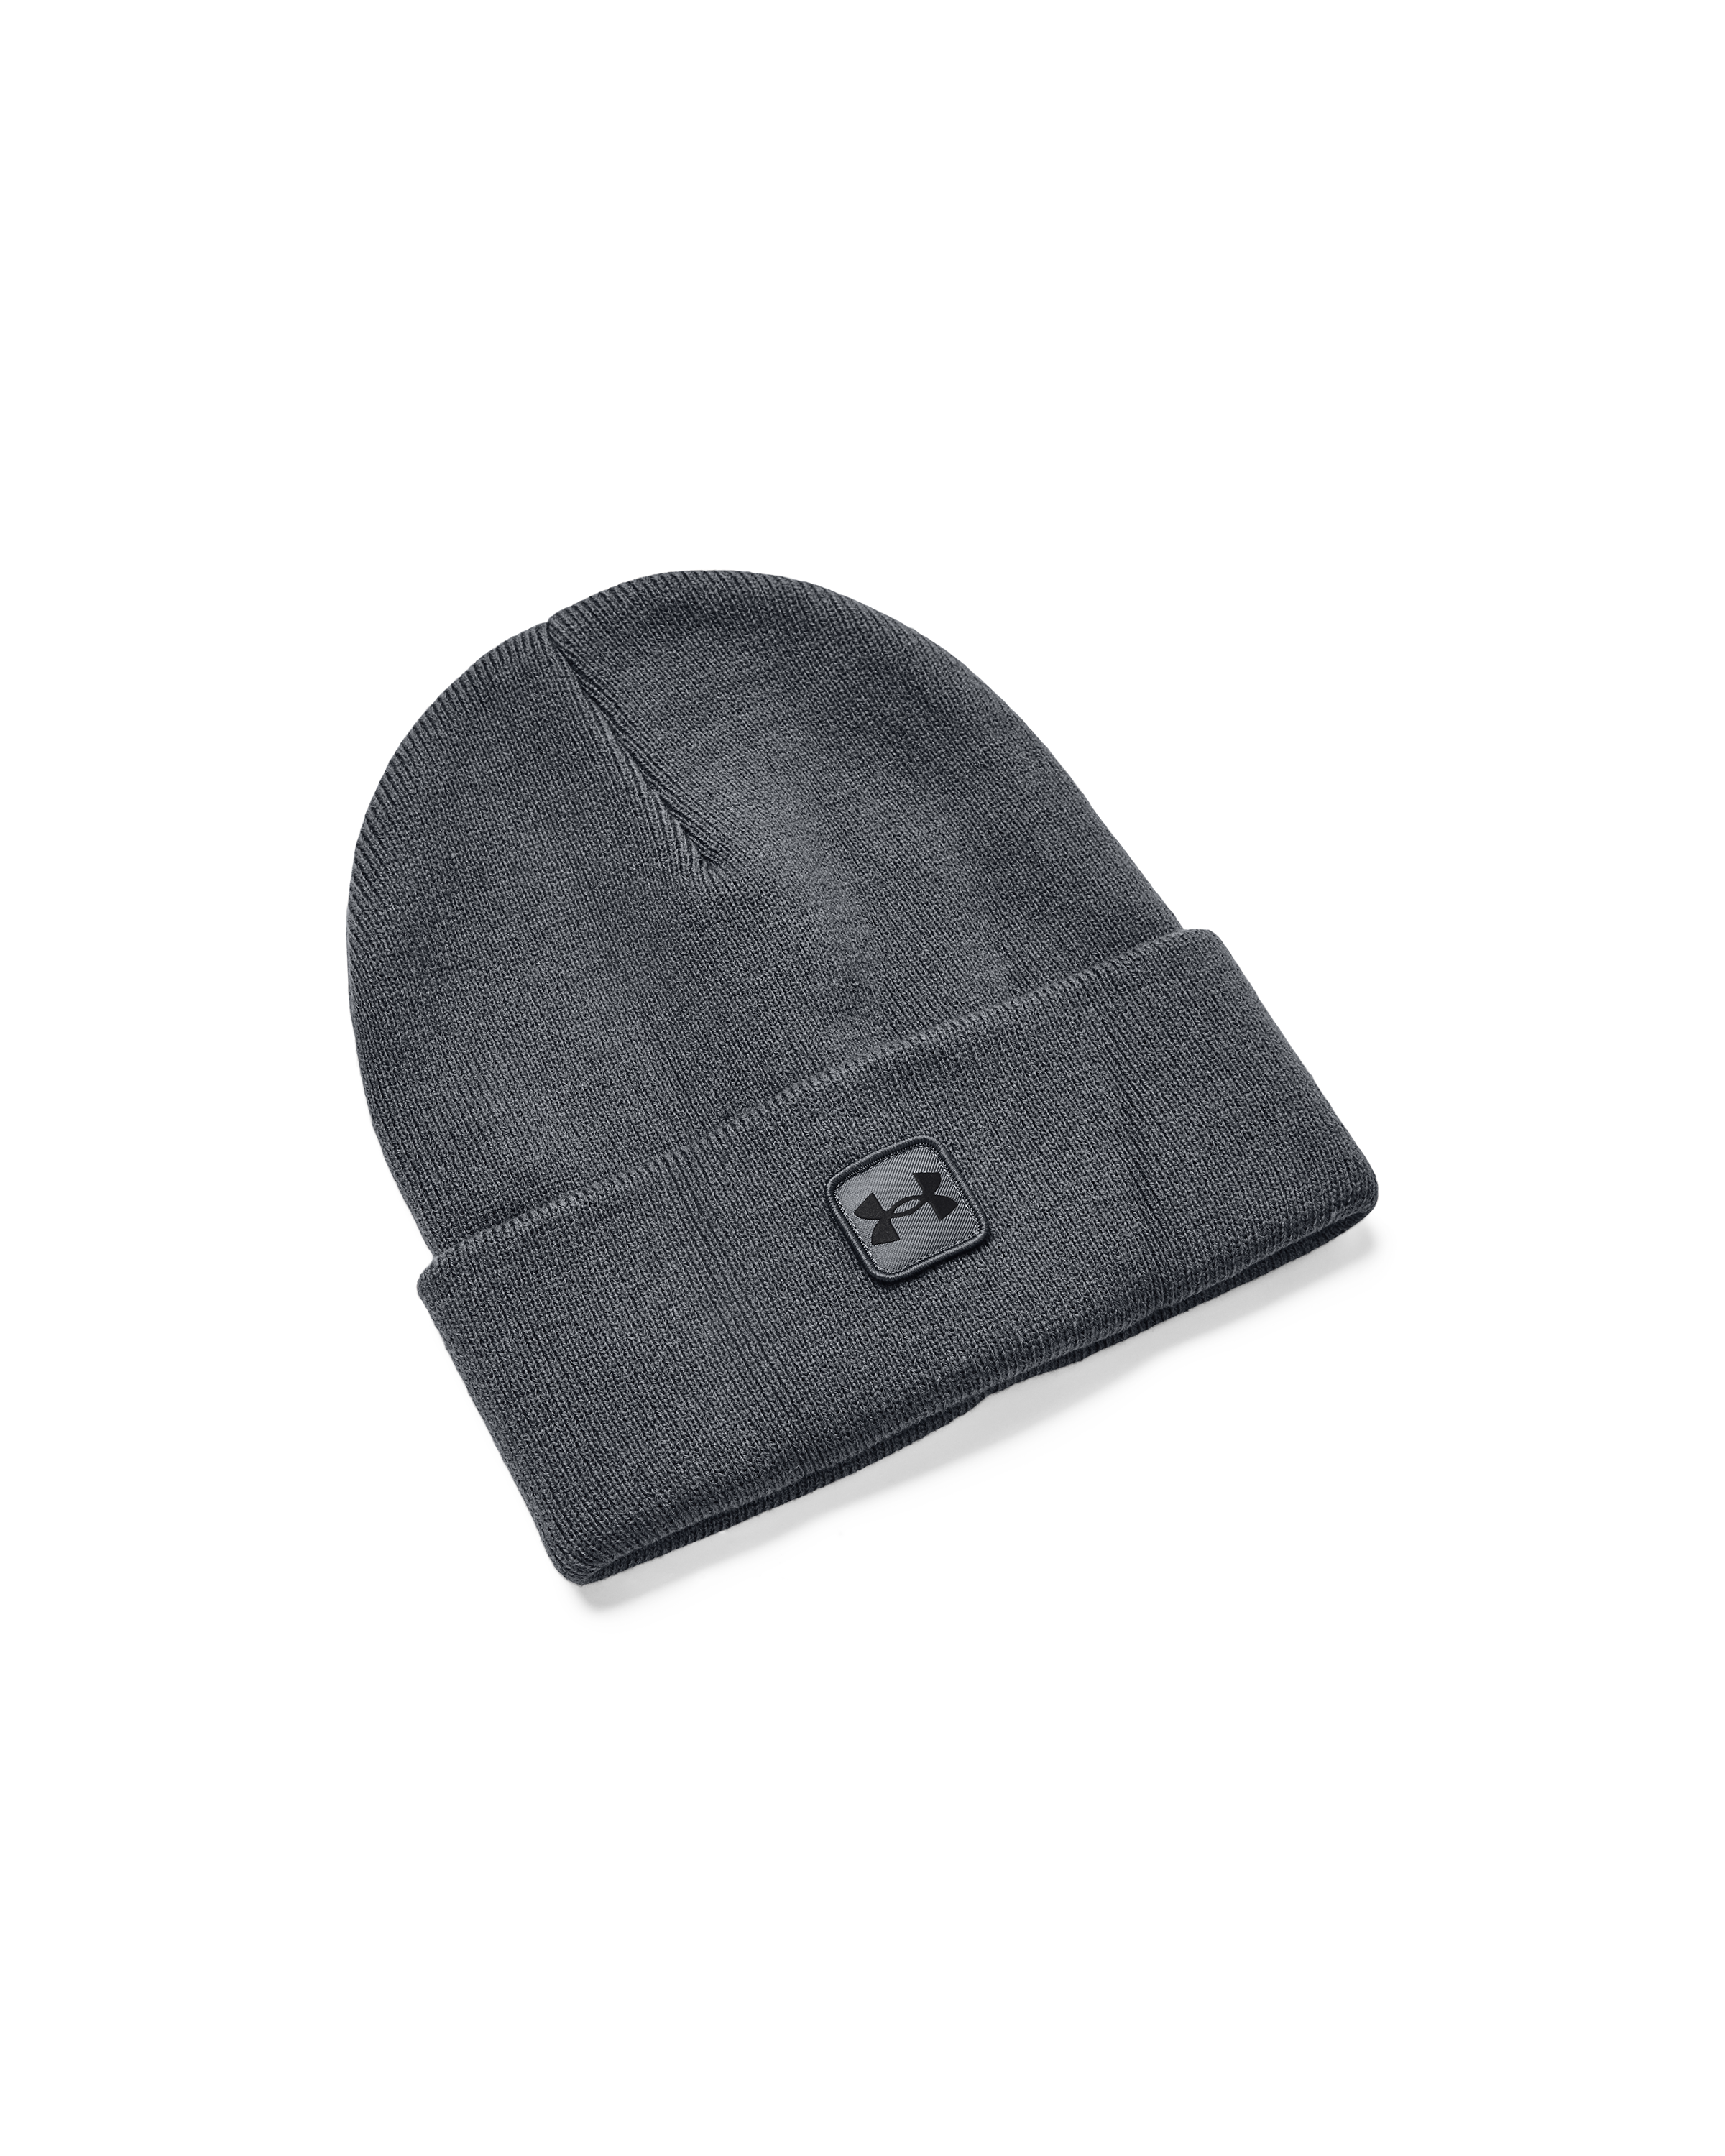 Men's Halftime Cuff Beanie from Under Armour